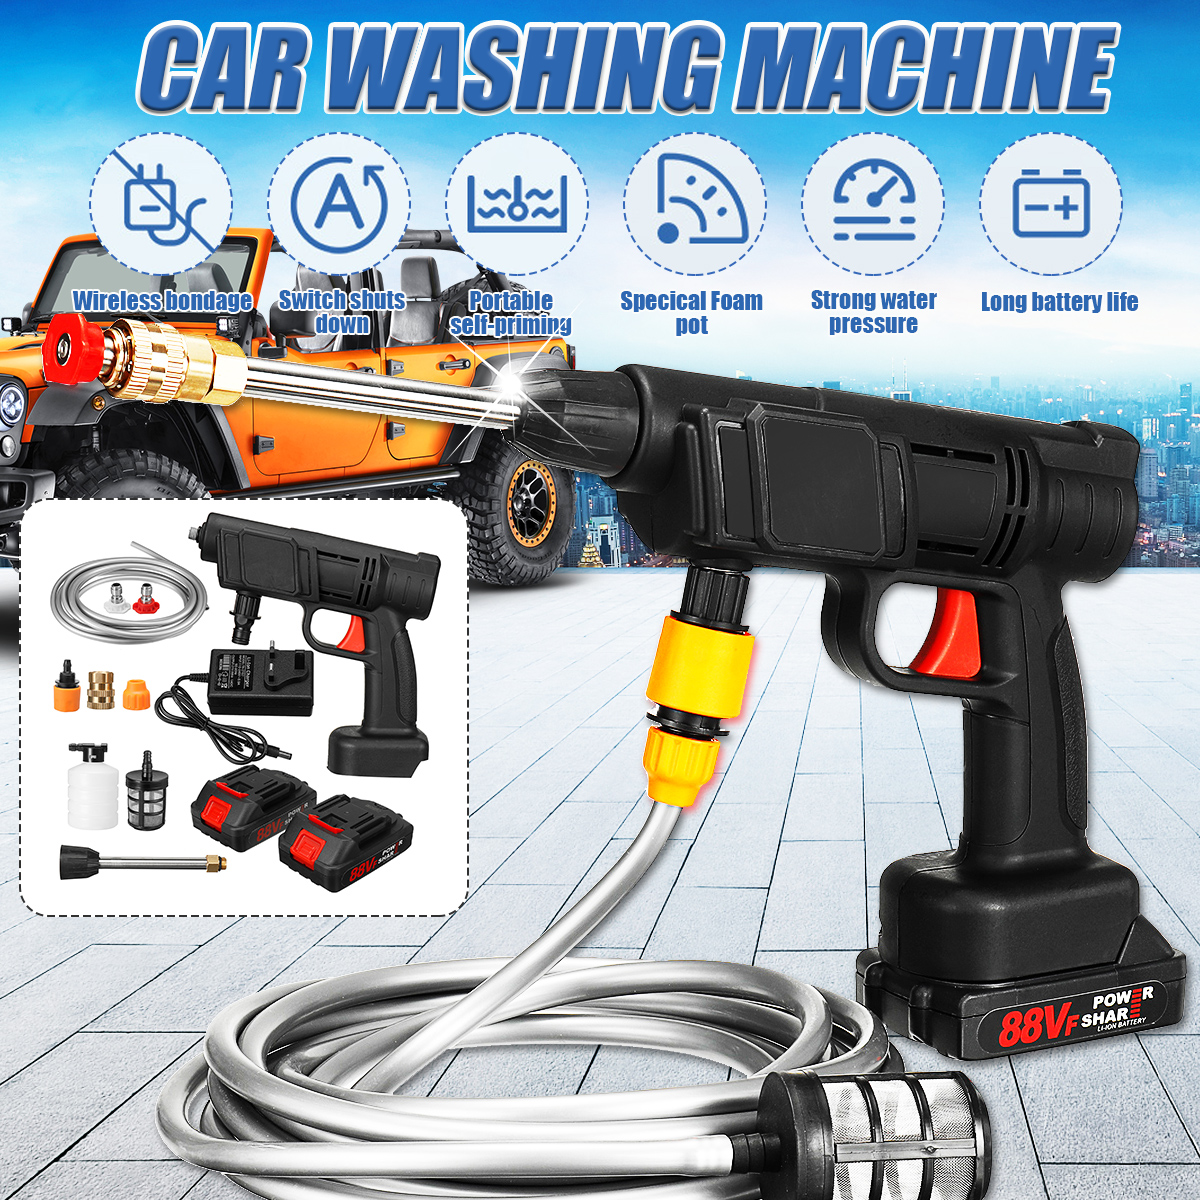 88VF-Cordless-High-Pressure-Washer-Car-Washing-Machine-Water-Spayer-Guns-Vehicle-Cleaning-Tool-W-Non-1867531-2